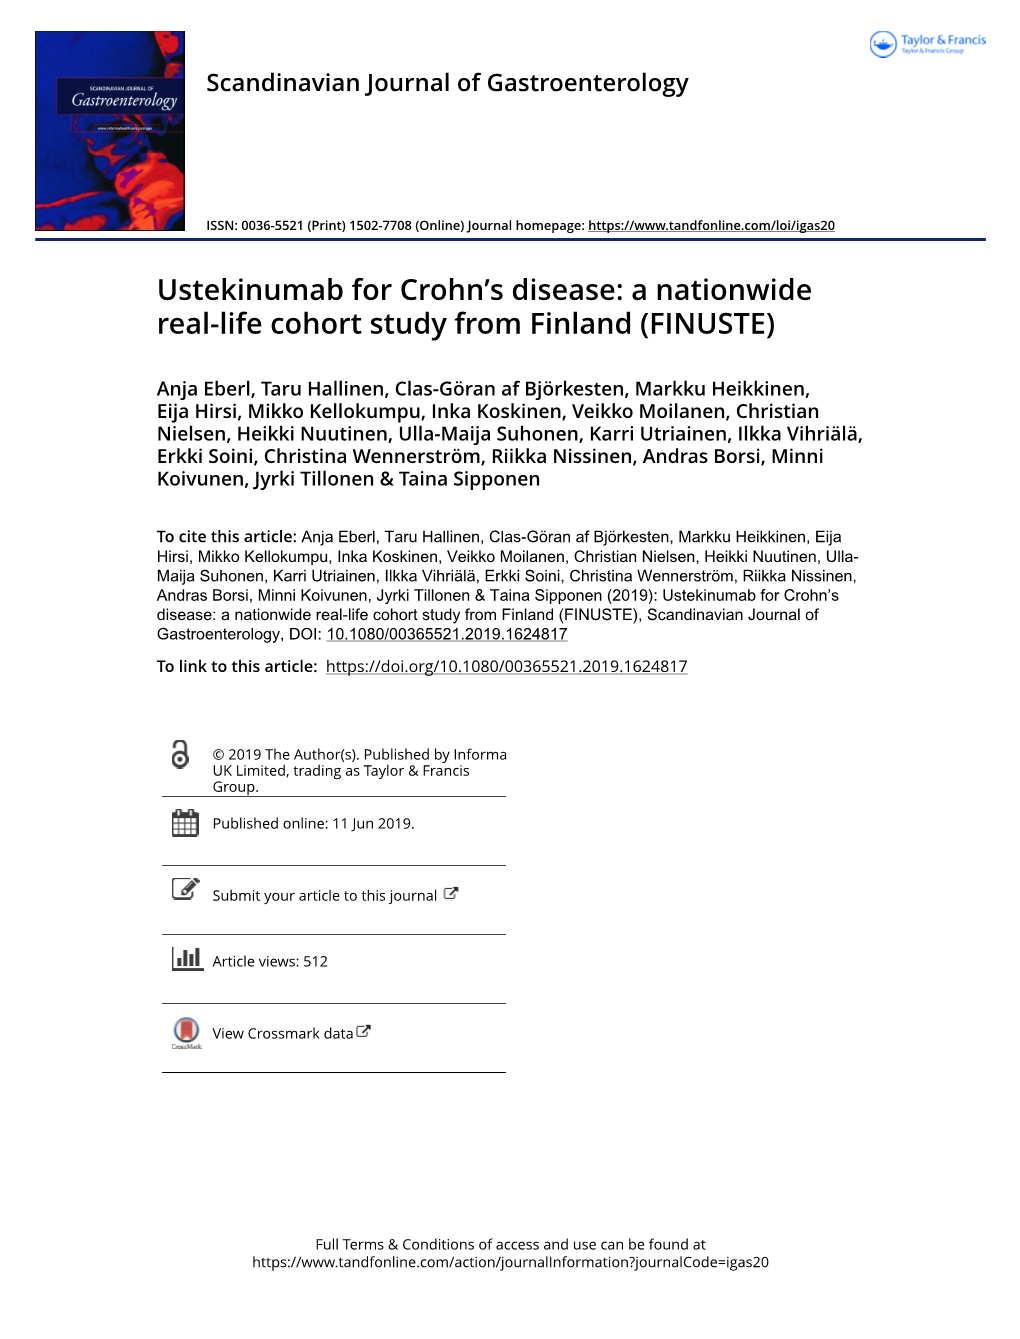 A Nationwide Real-Life Cohort Study from Finland (FINUSTE)